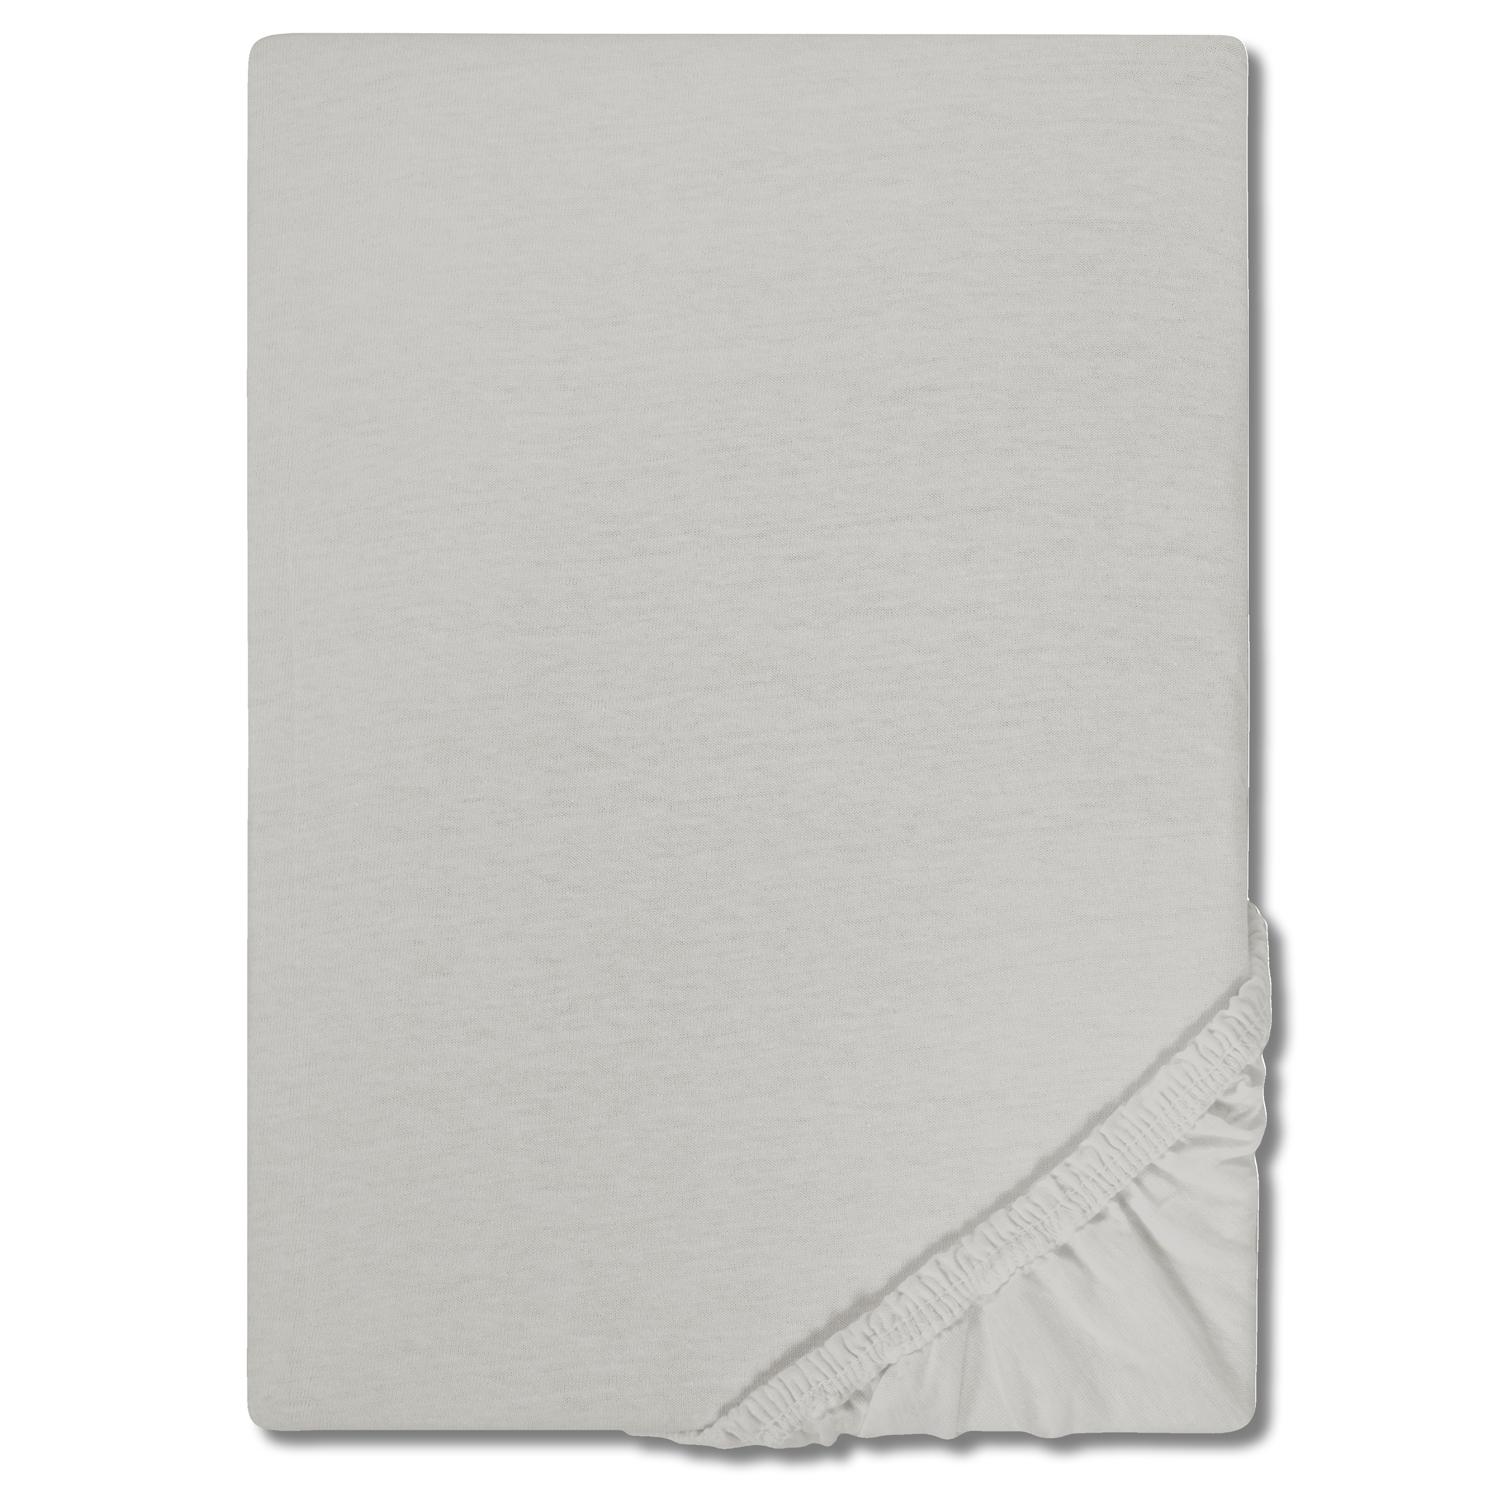 CloudComfort Basic fitted sheet jersey stretch silver gray 140 x 190 - 160 x 200 cm